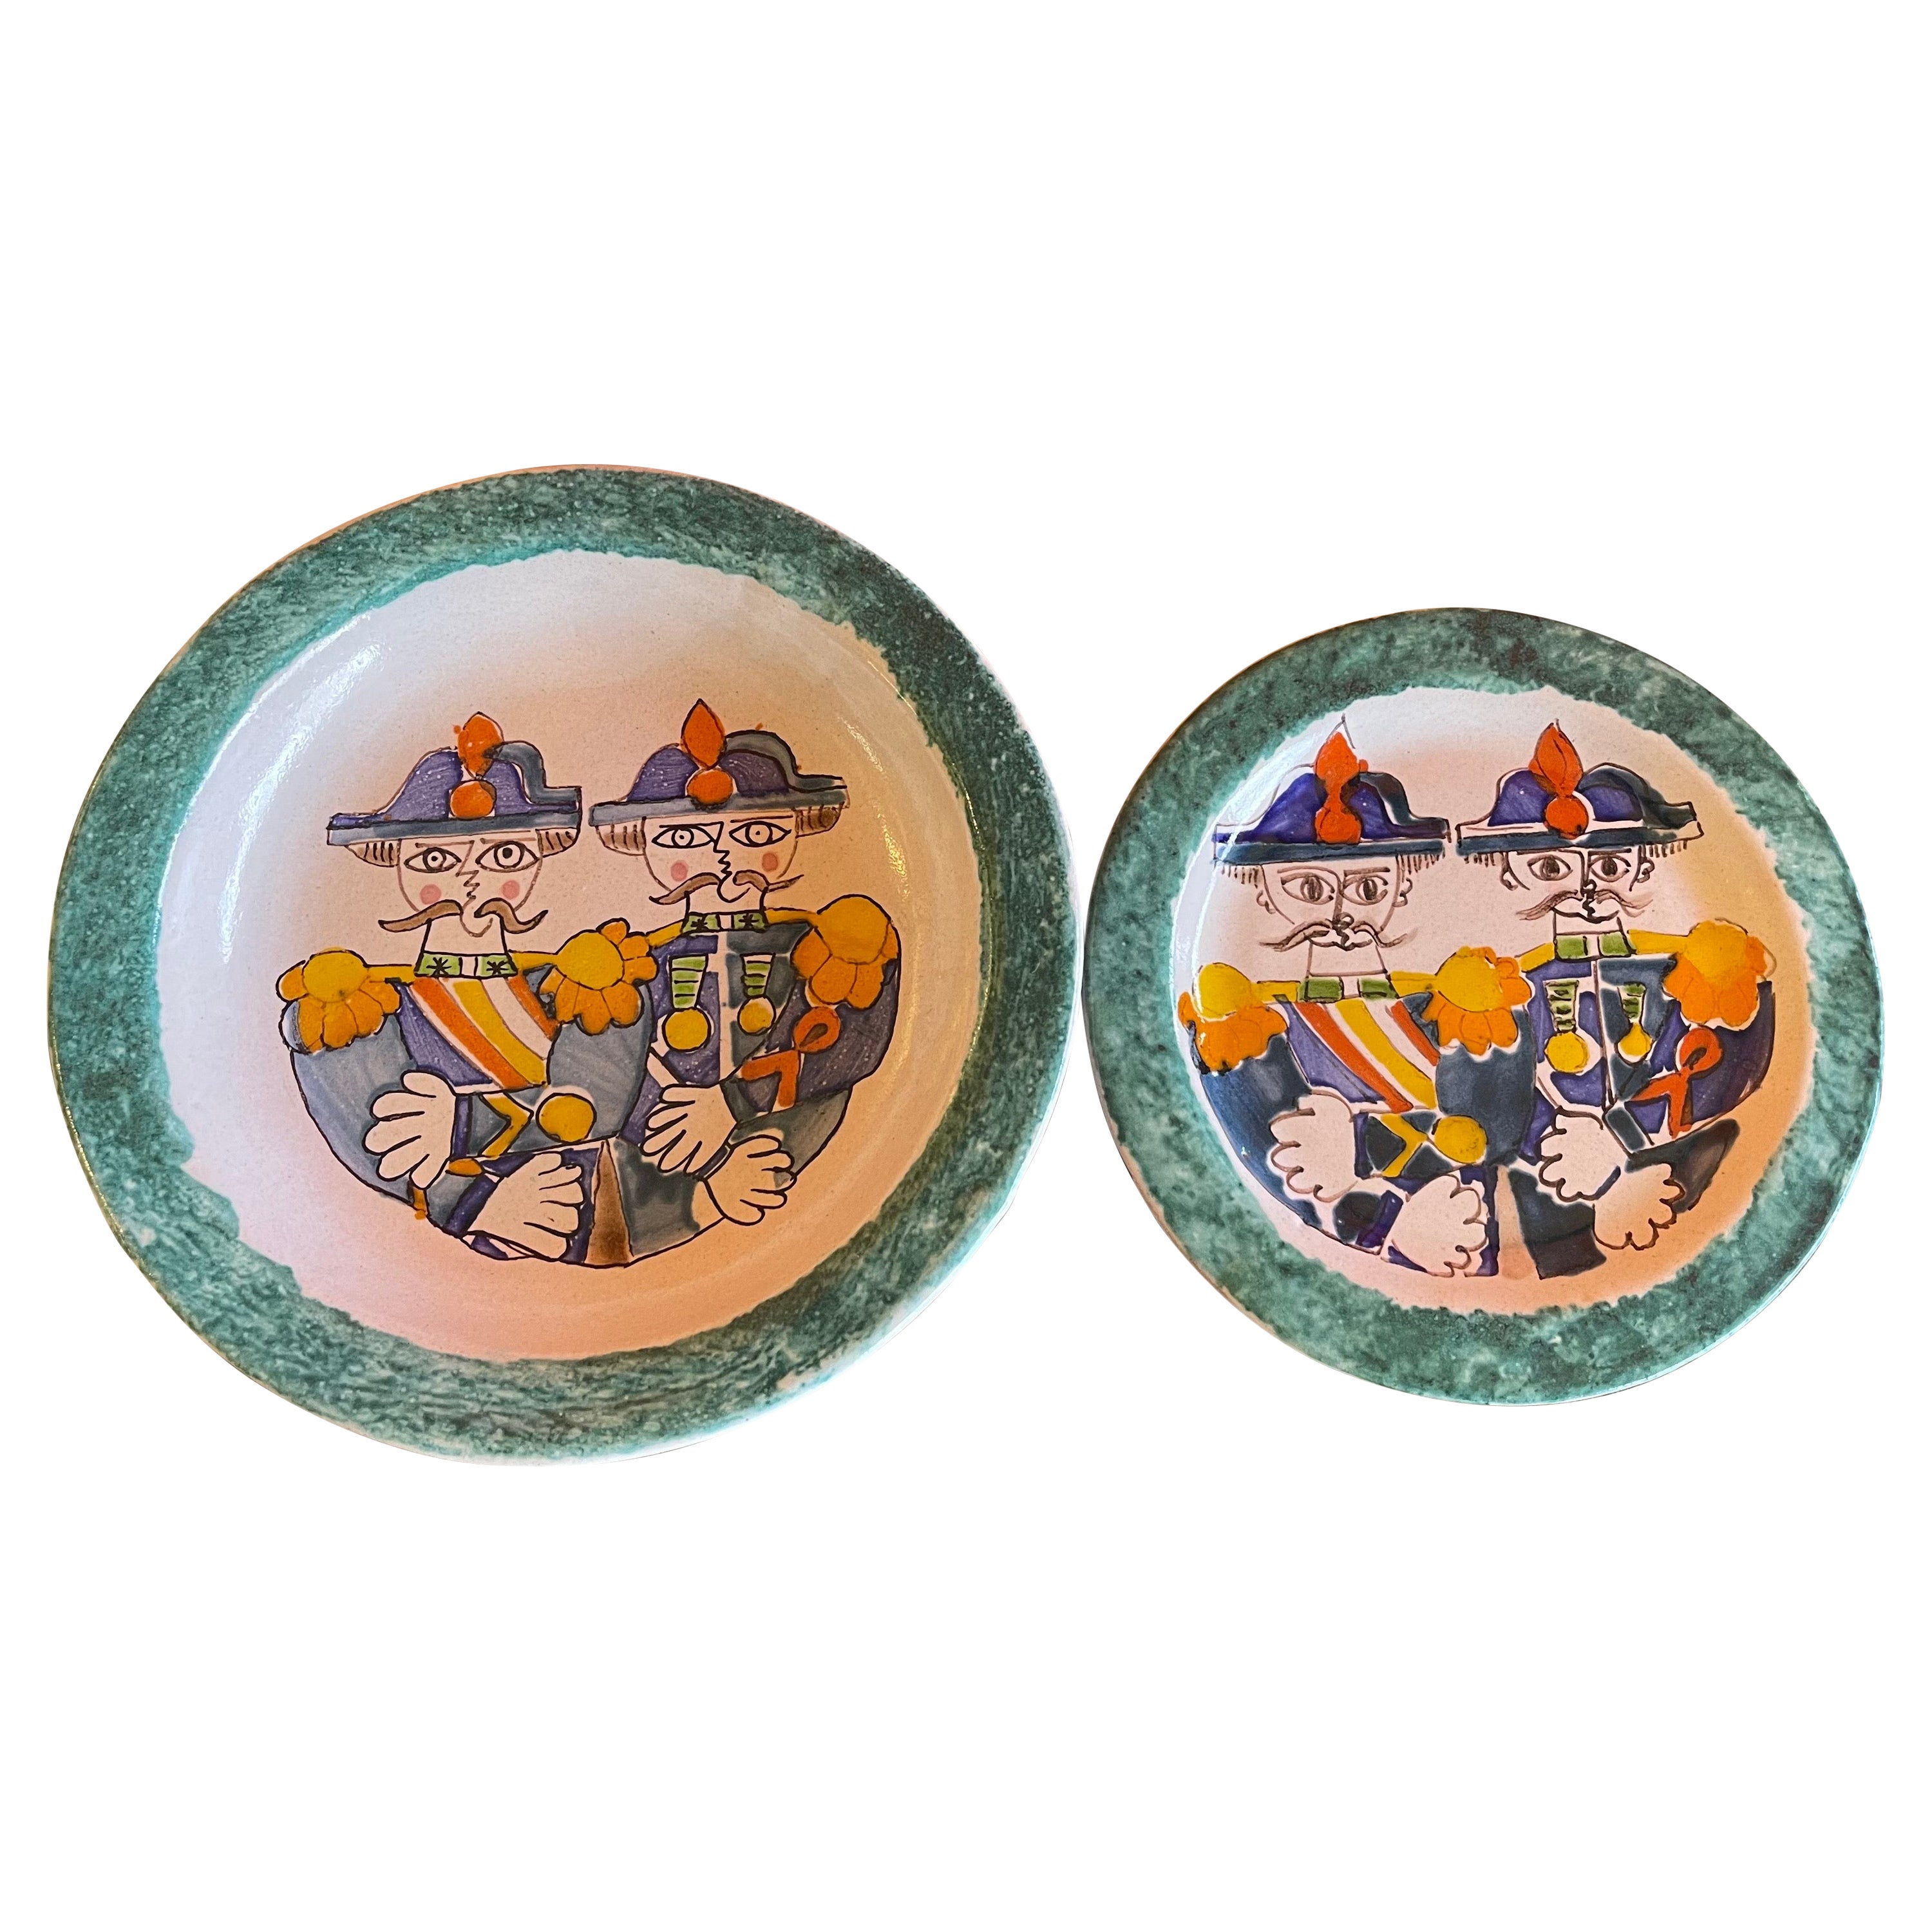 Decorative Hand Painted Italian Ceramic Plate and Bowl by DeSimone